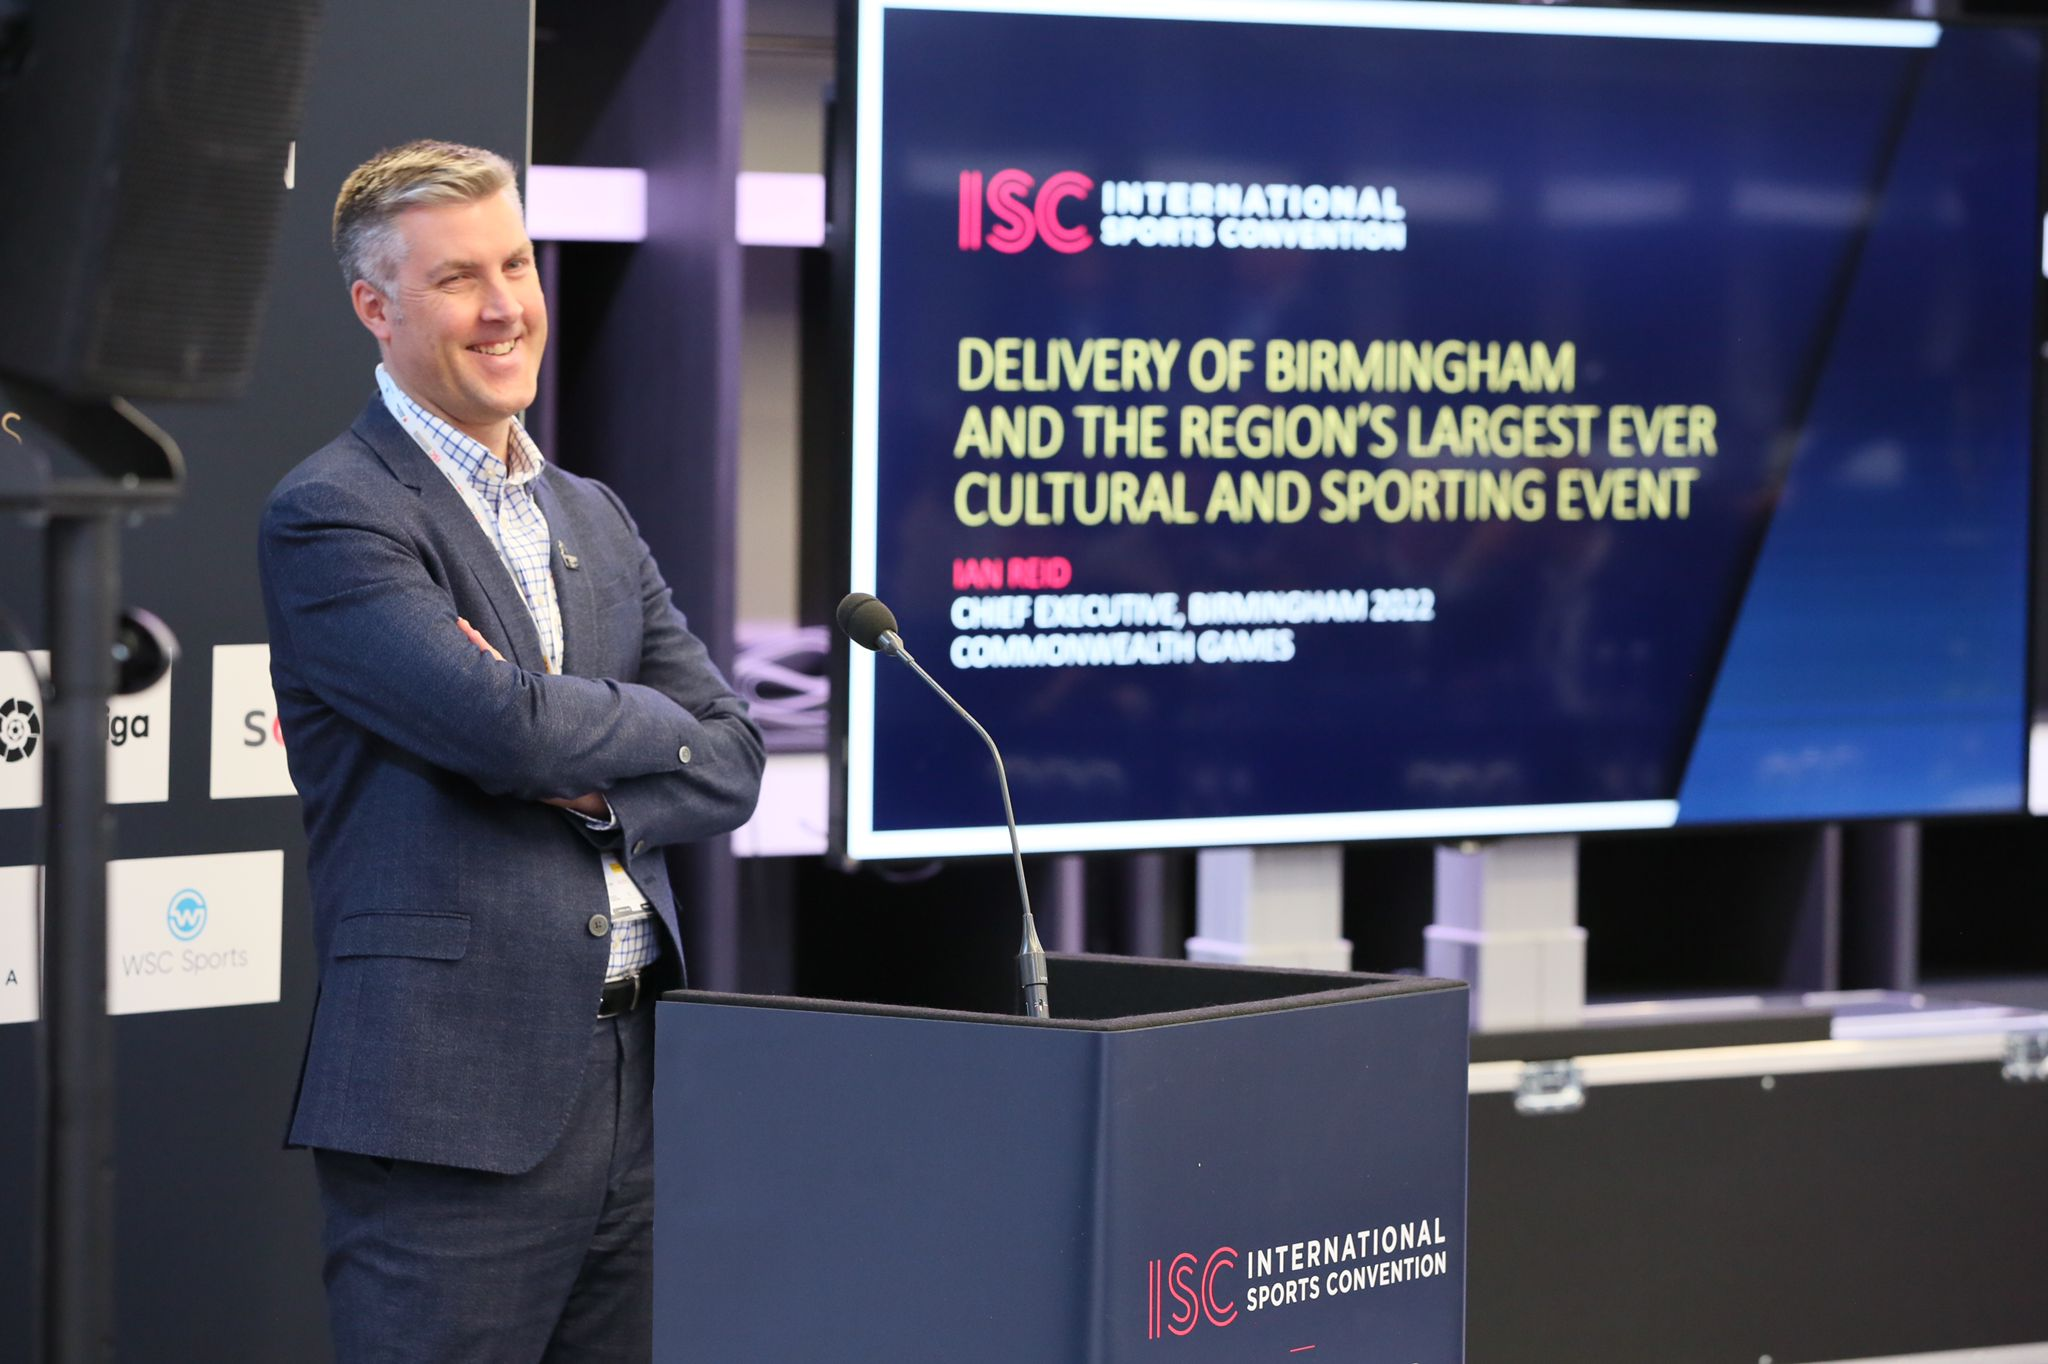 Commonwealth Games Scotland have appointed former Birmingham 2022 chief executive Ian Reid as its new chair ©International Sports Convention